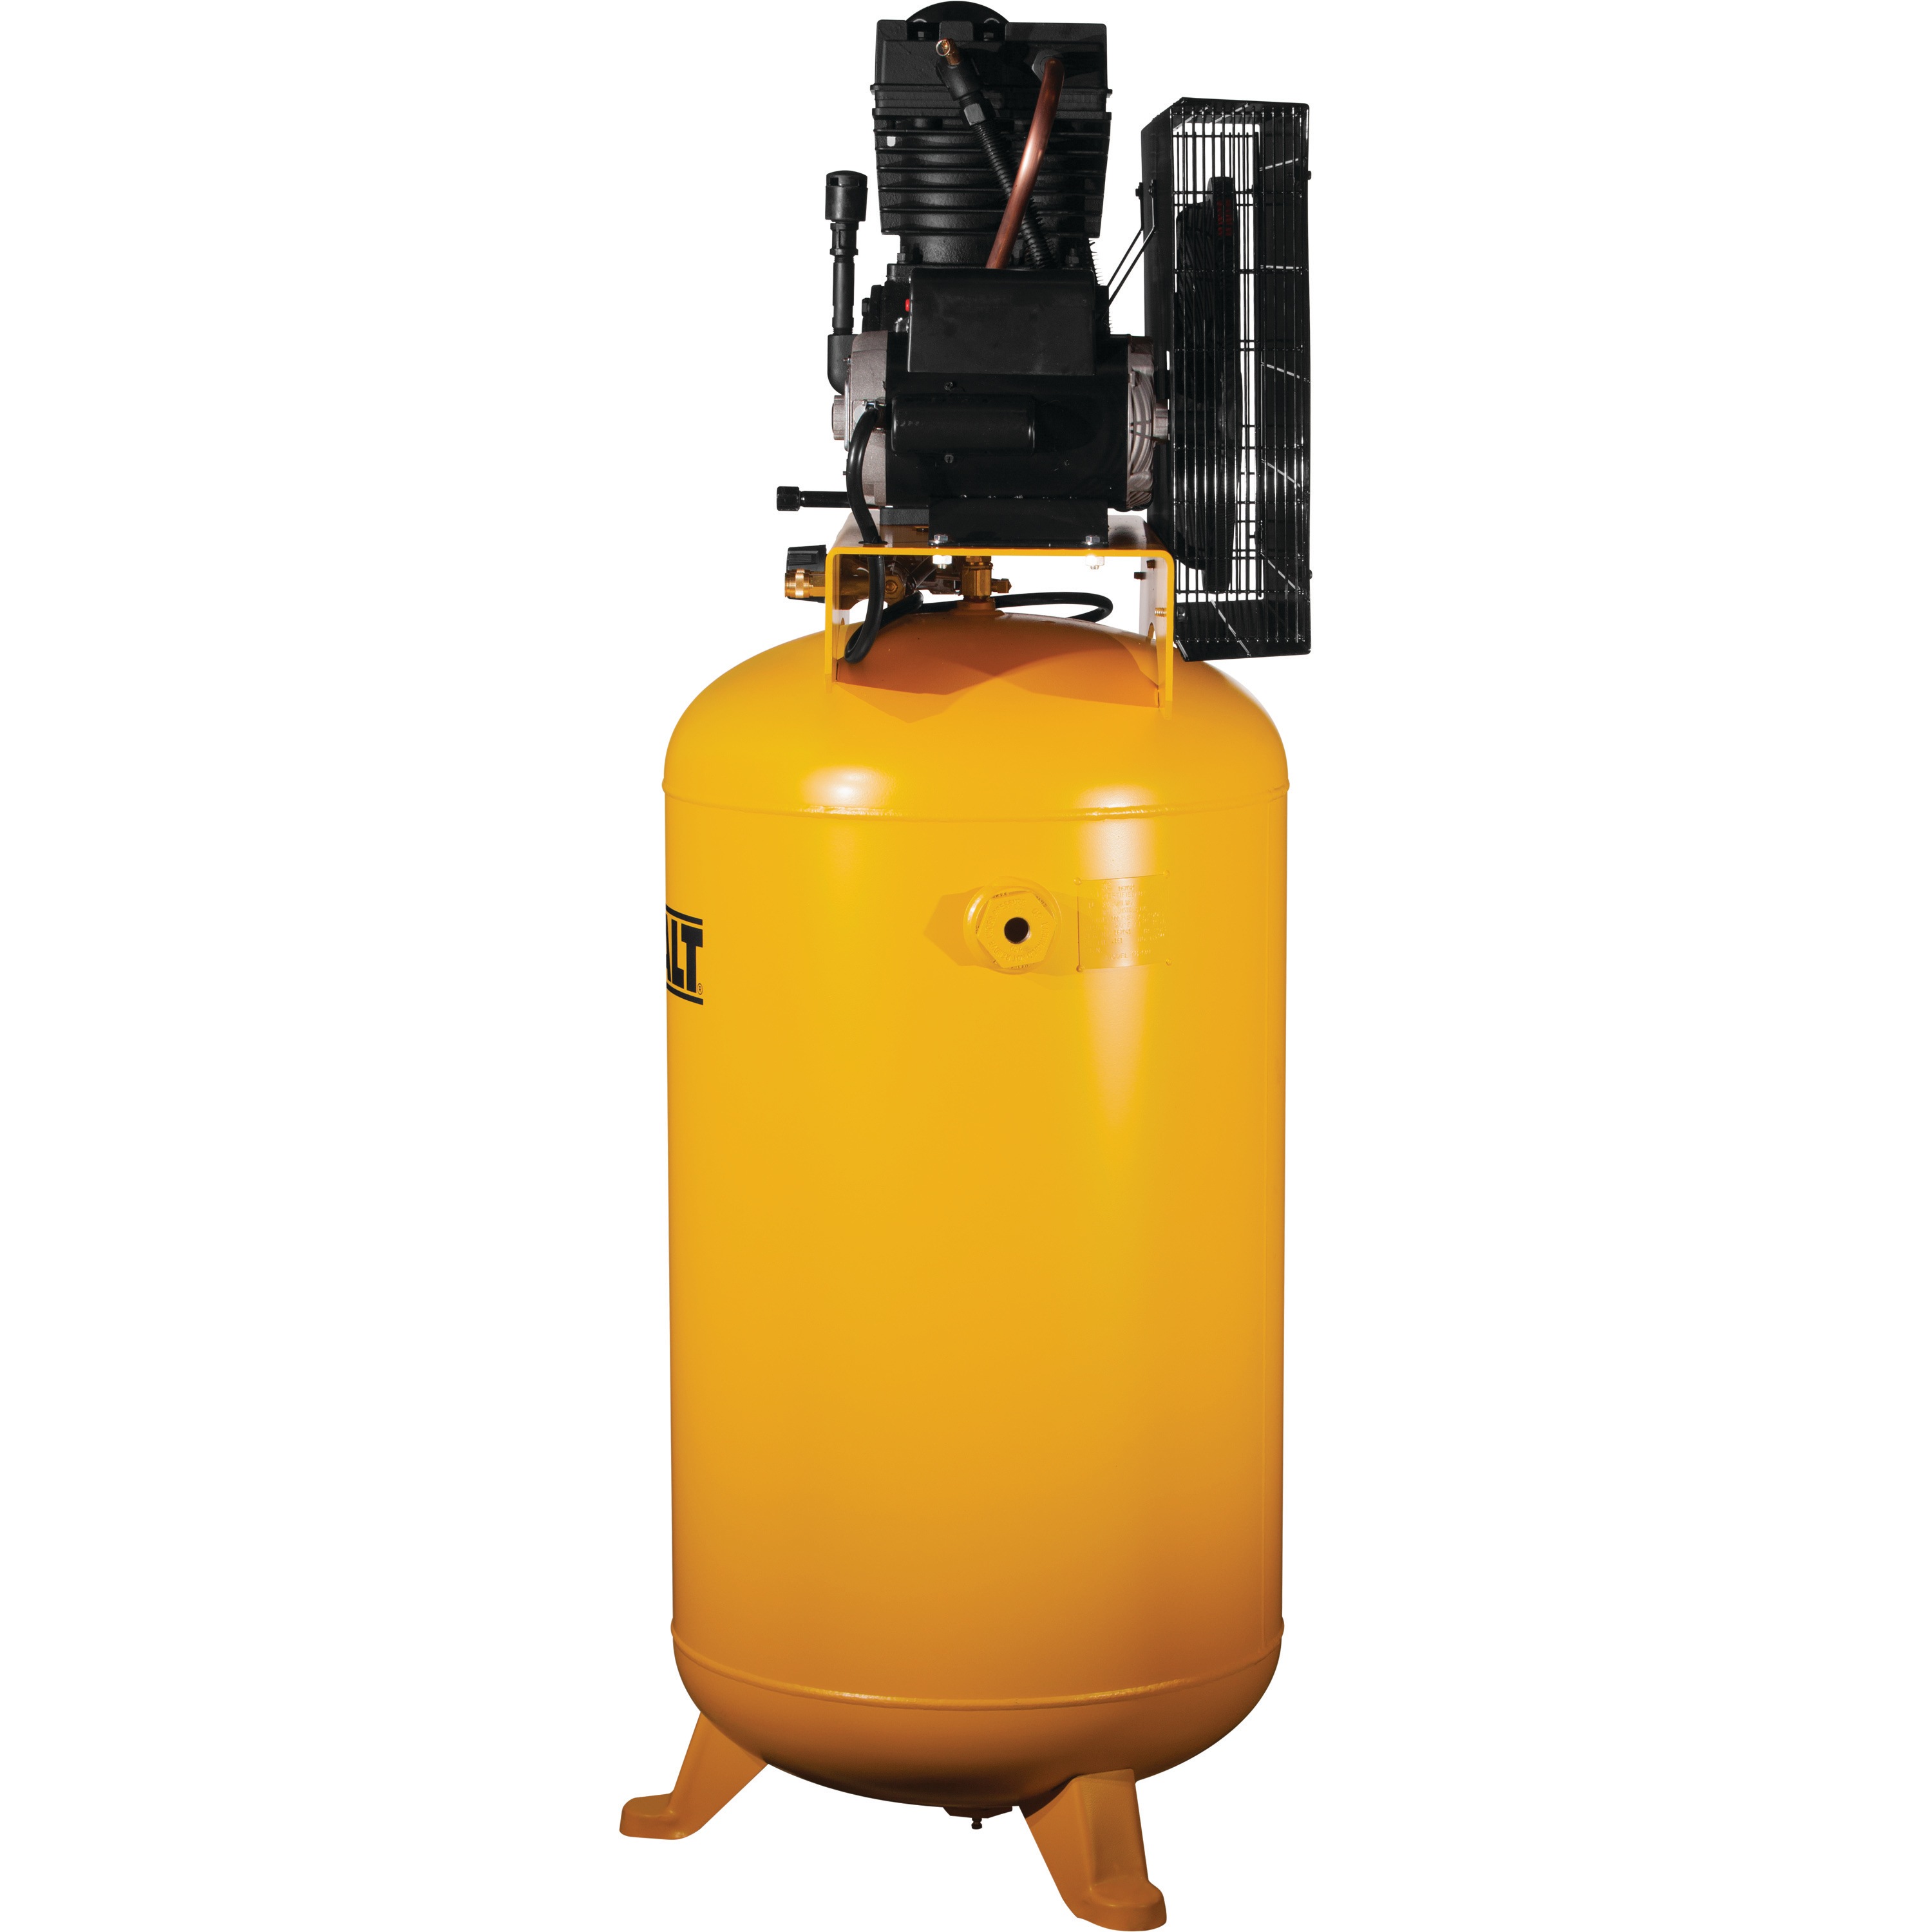 Profile of 80 gallons Stationary Electric Air Compressor.